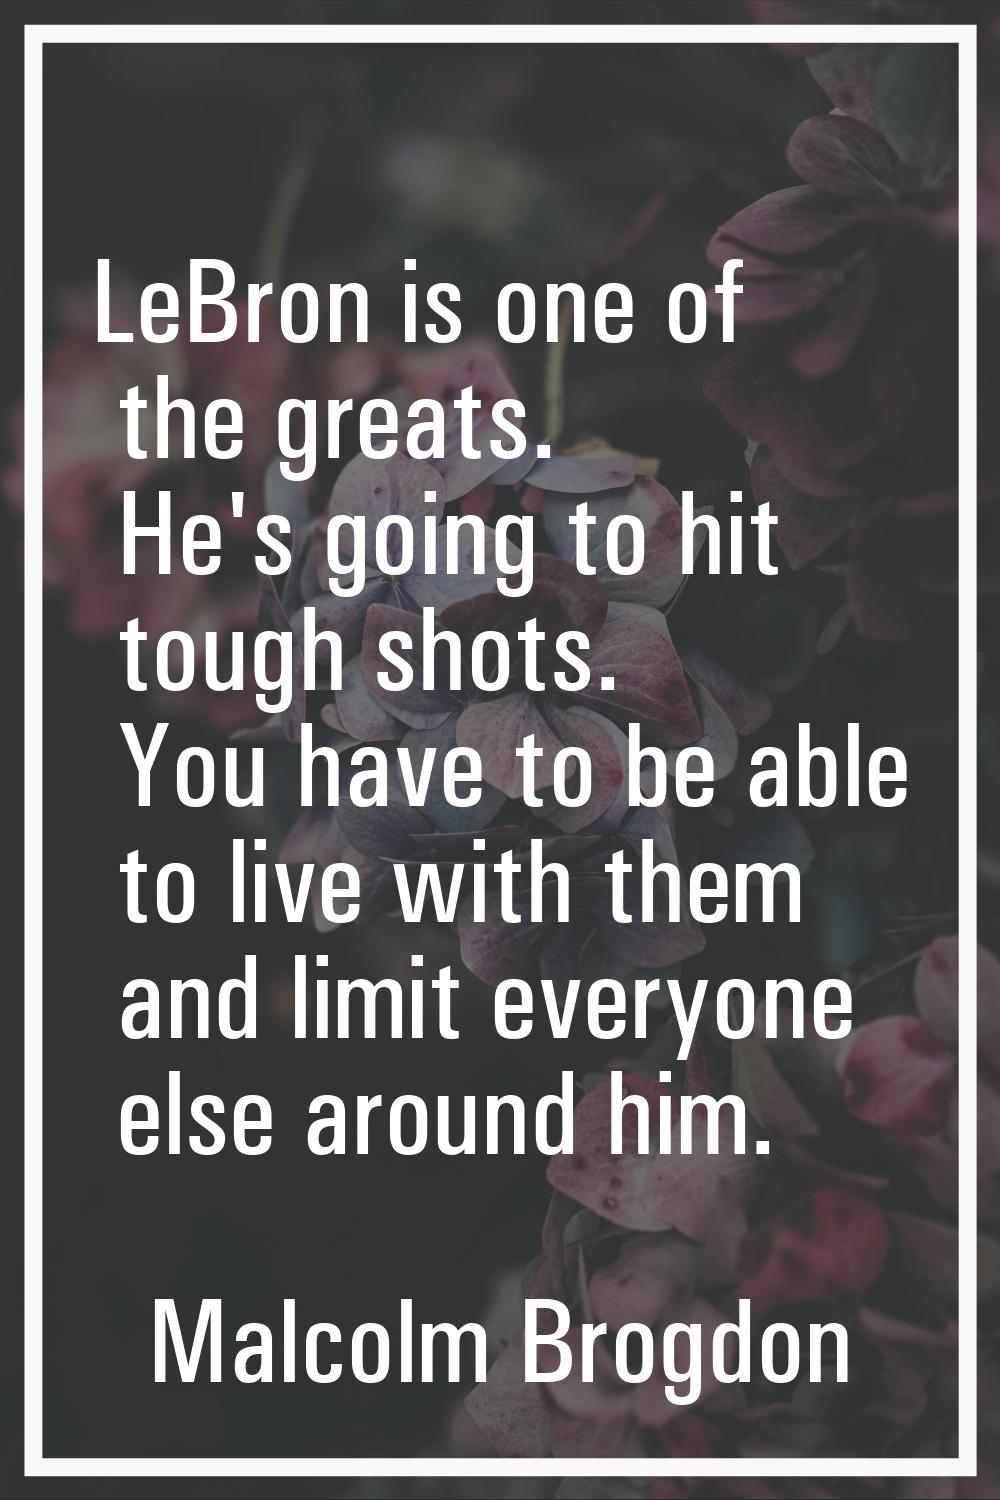 LeBron is one of the greats. He's going to hit tough shots. You have to be able to live with them a